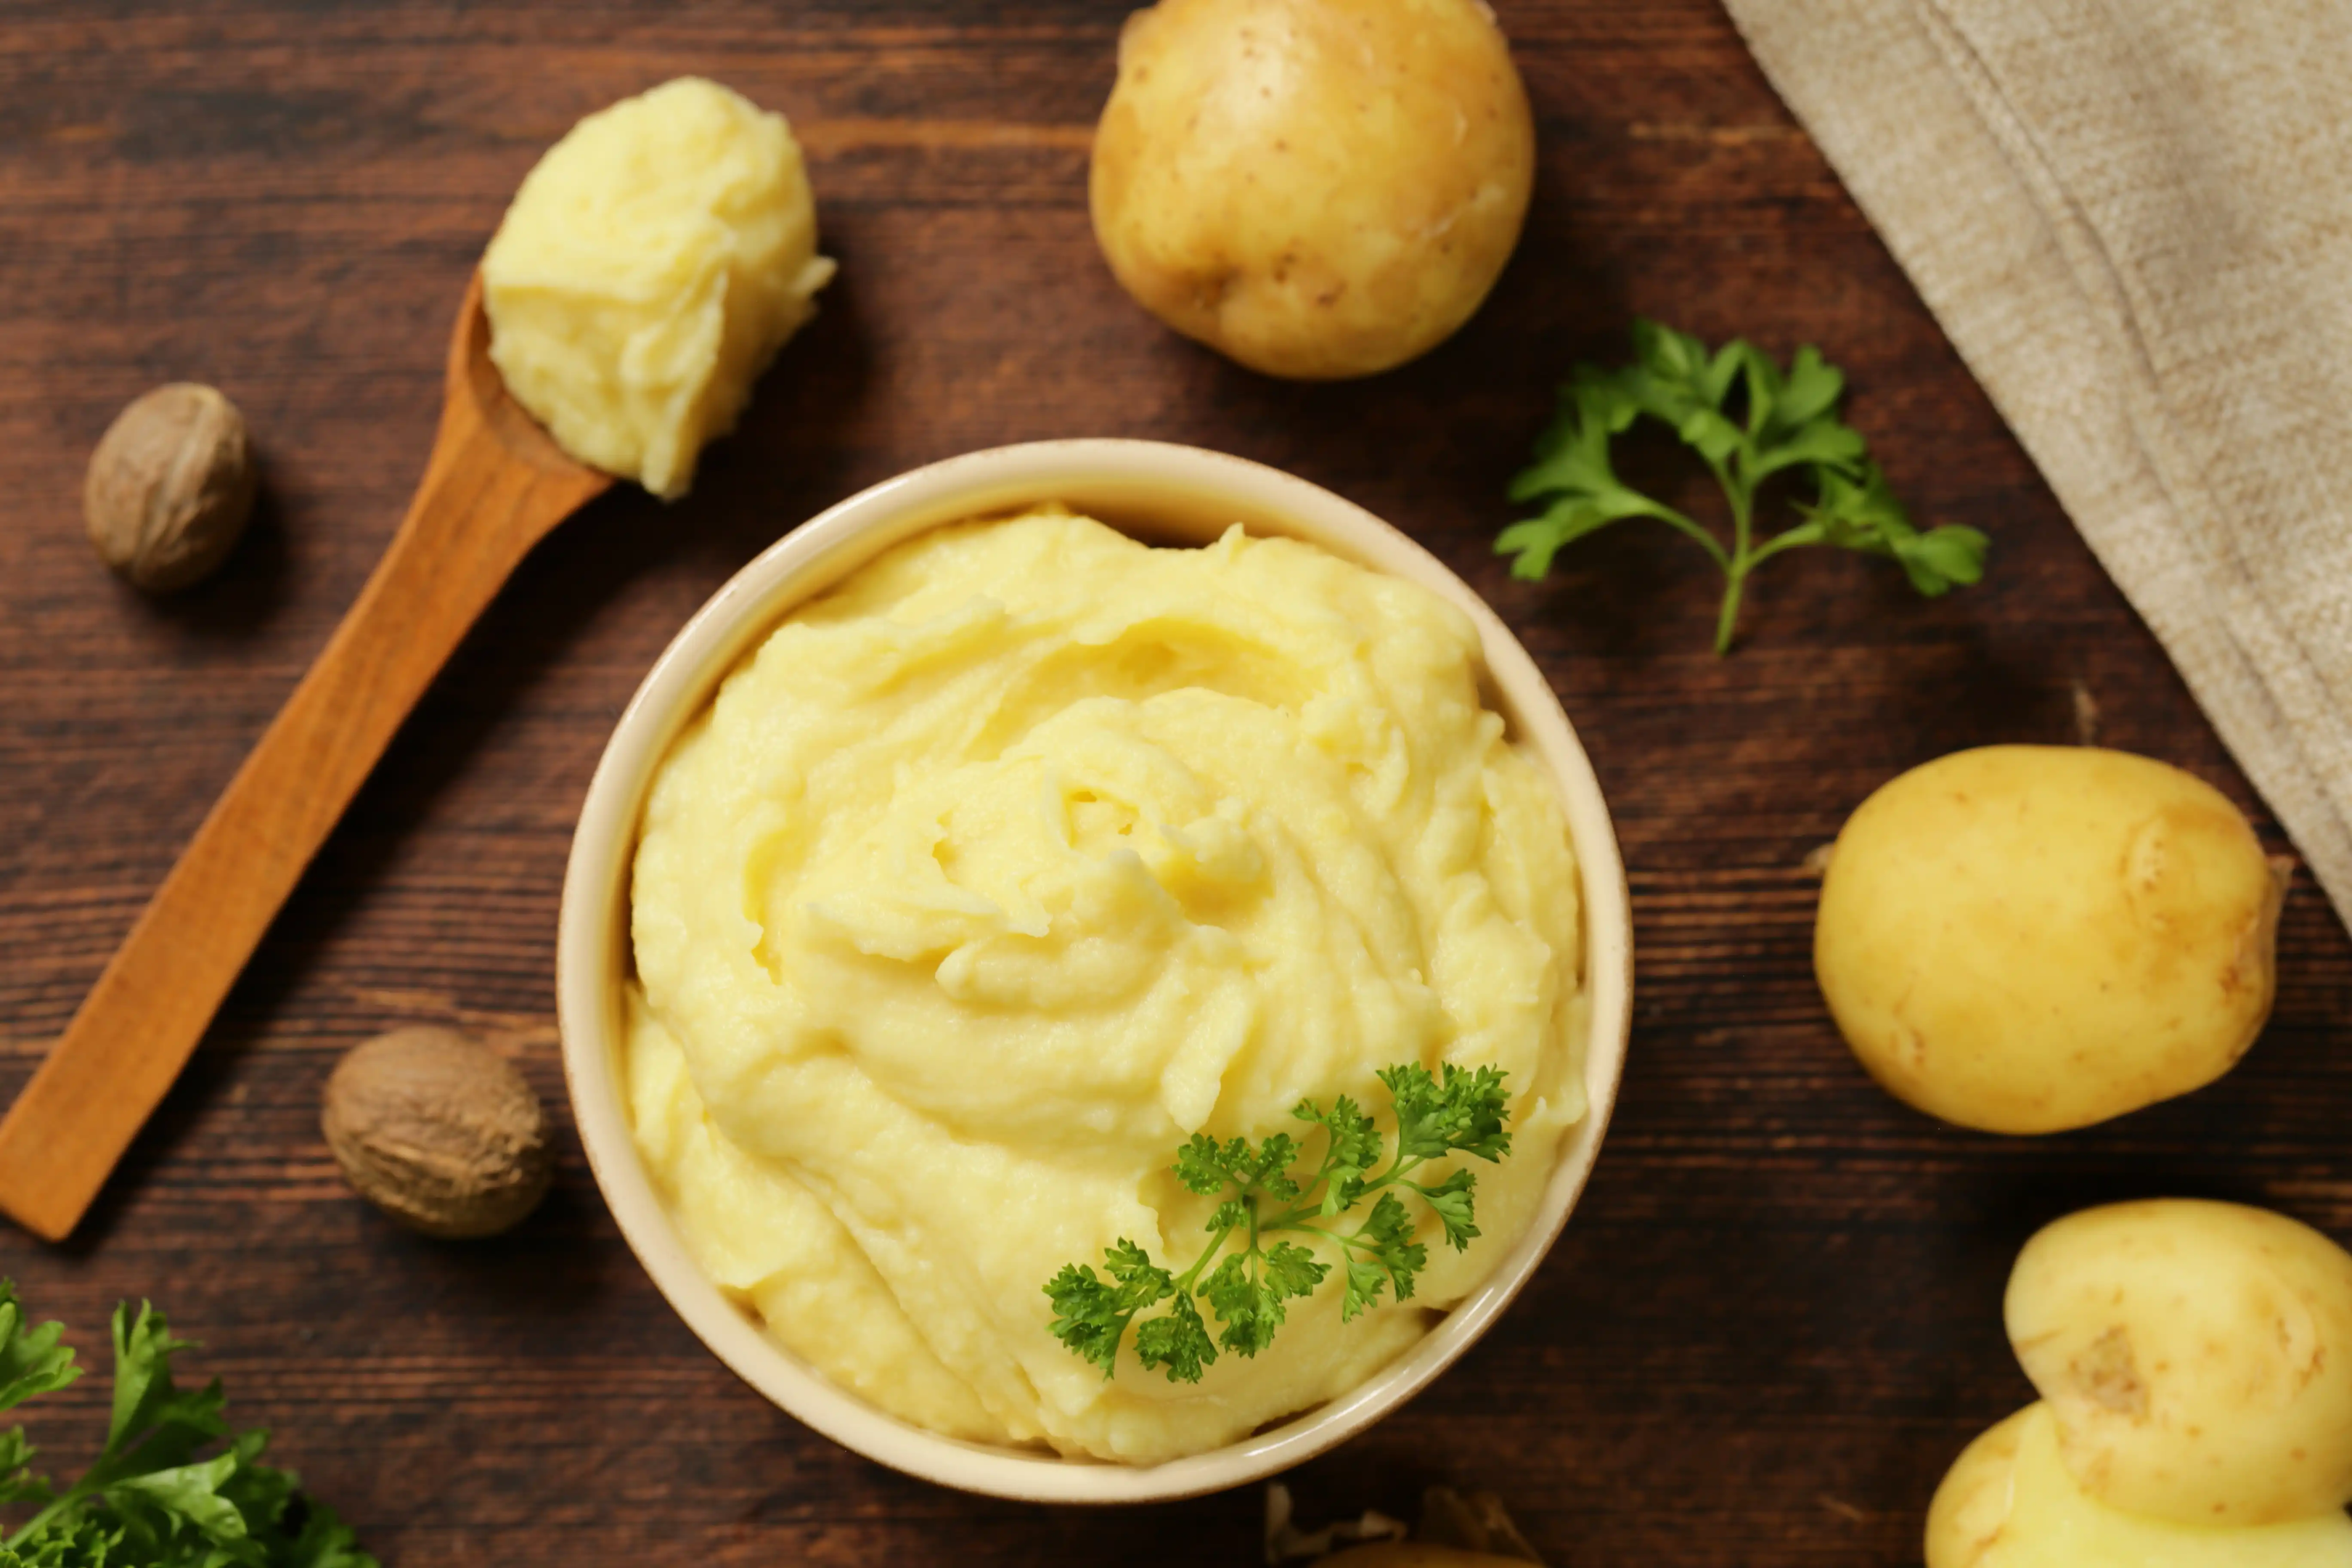 meal kits for mashed potatoes